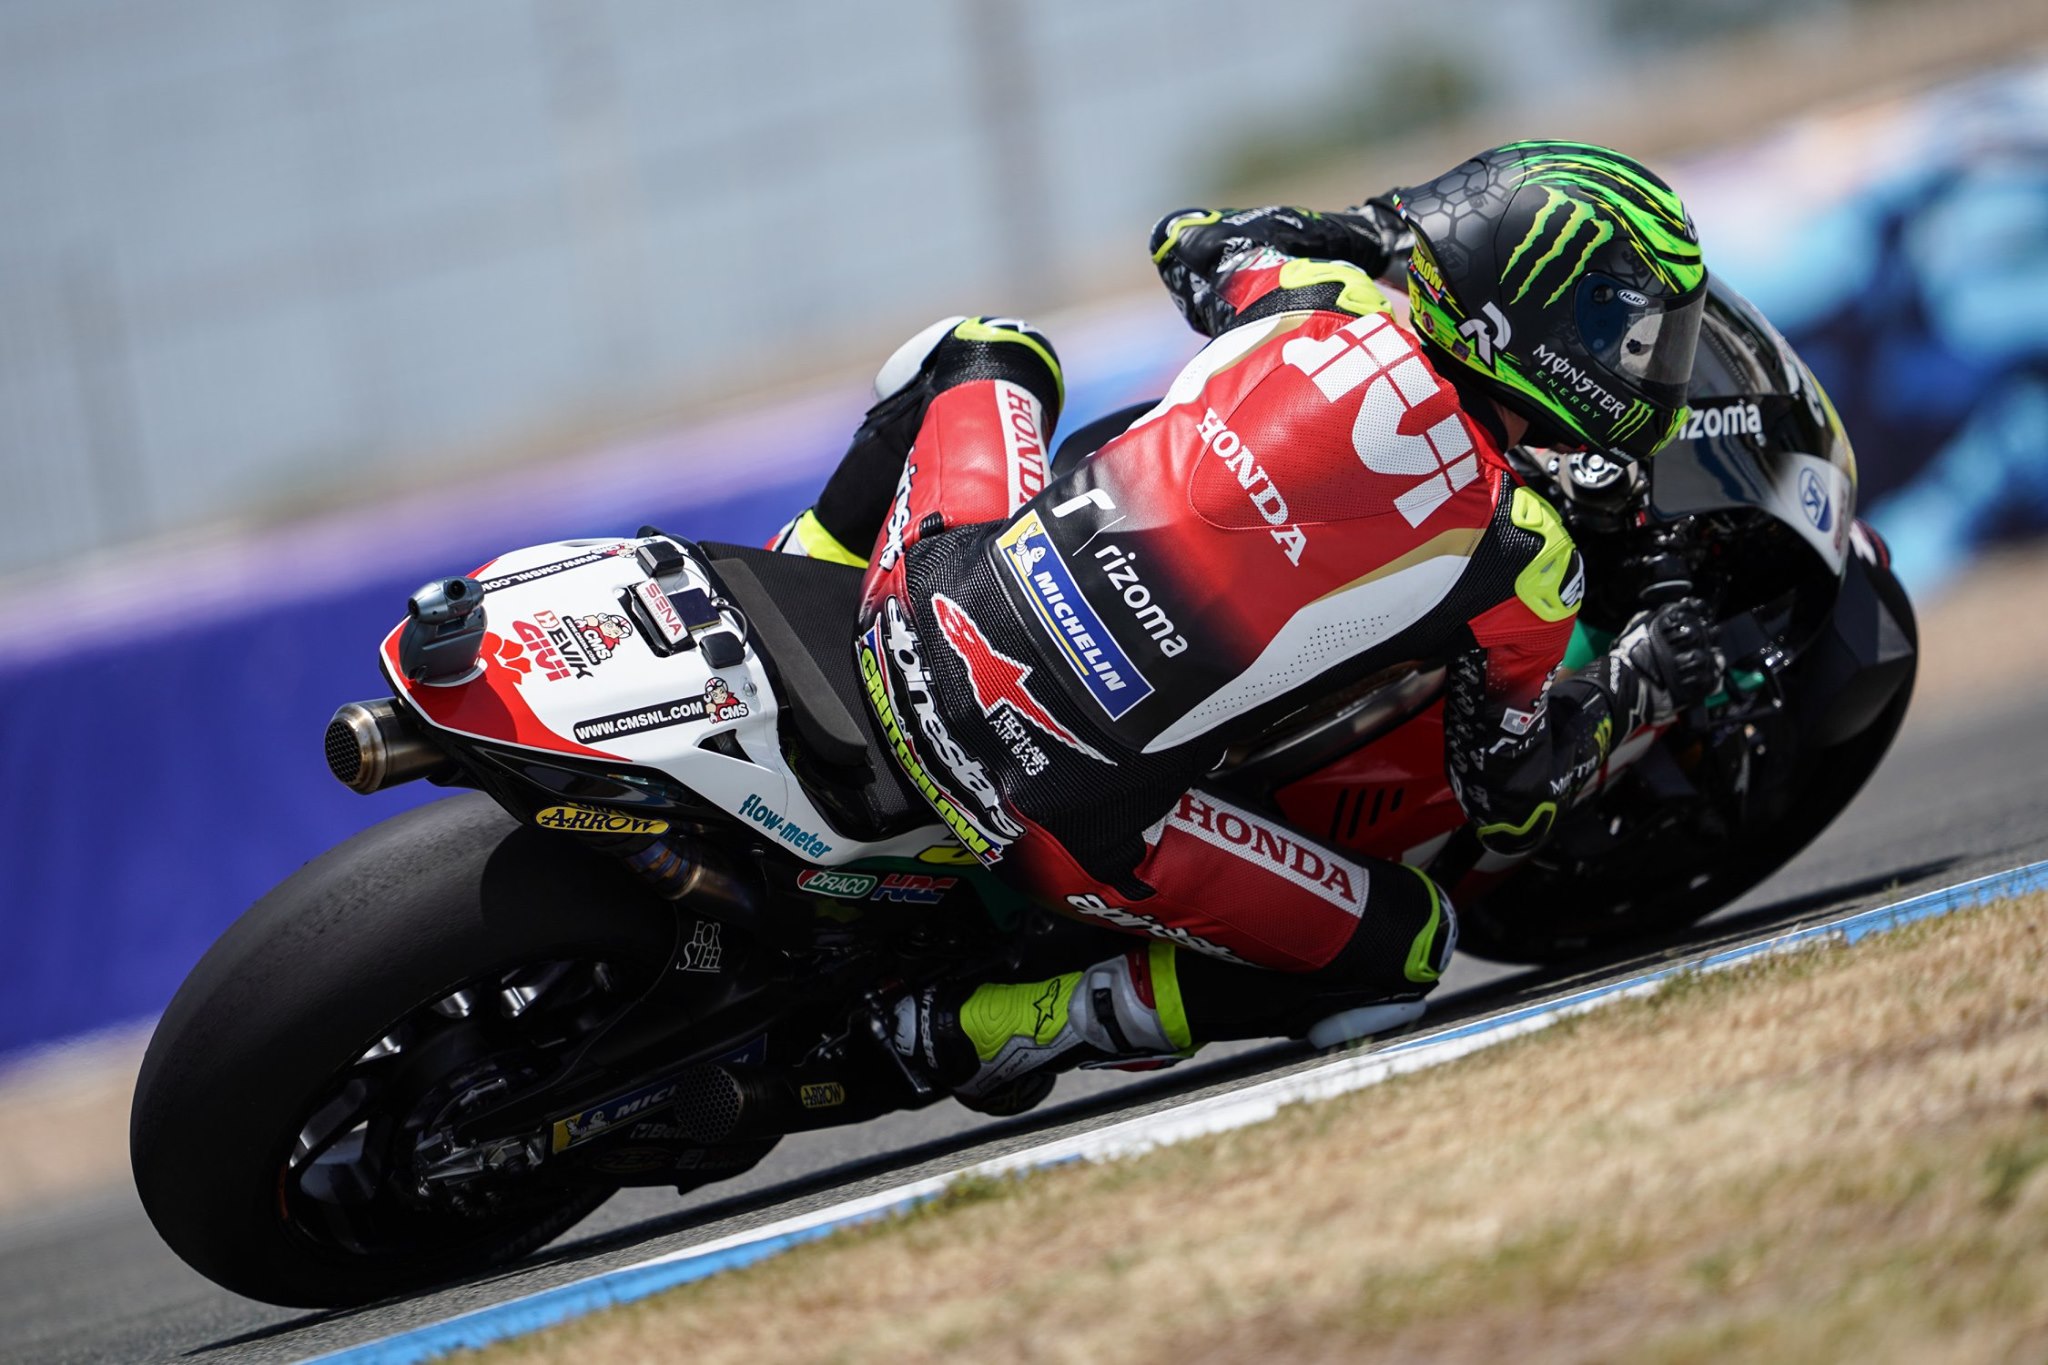 Crutchlow third overall on positive first day of MotoGP racing